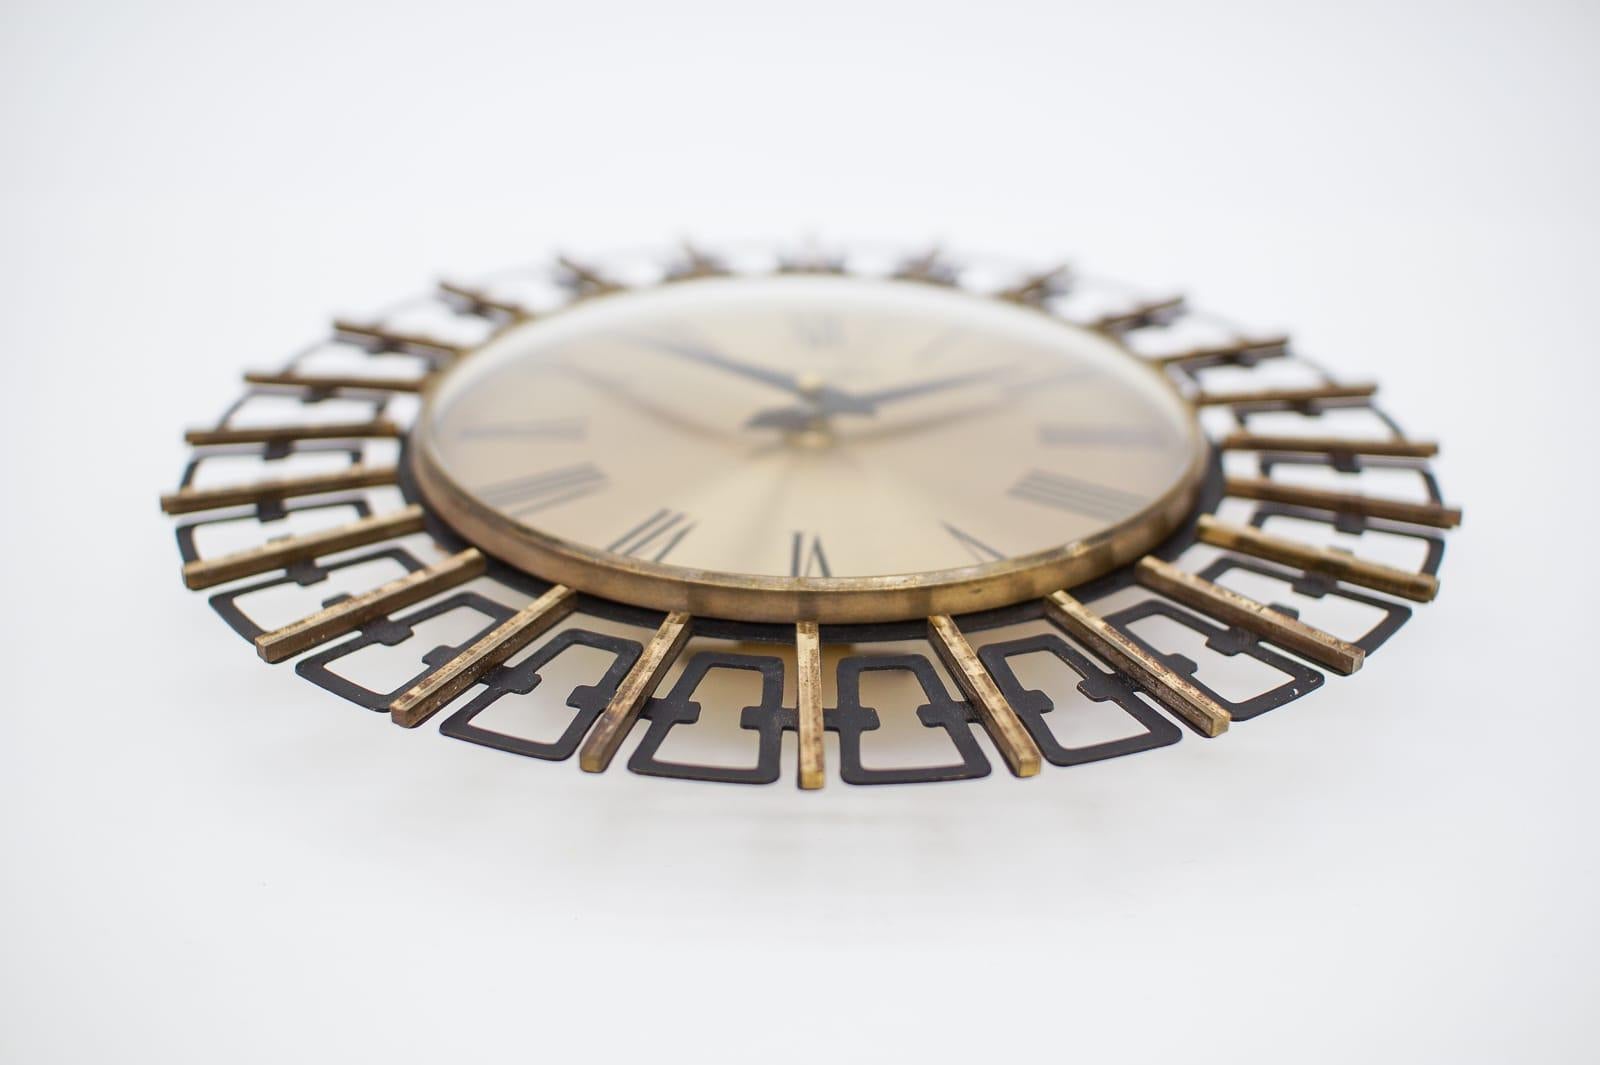 Mid-Century Modern Sunburst Wall Clock in Brass by Dugena, 1960s, Germany For Sale 2